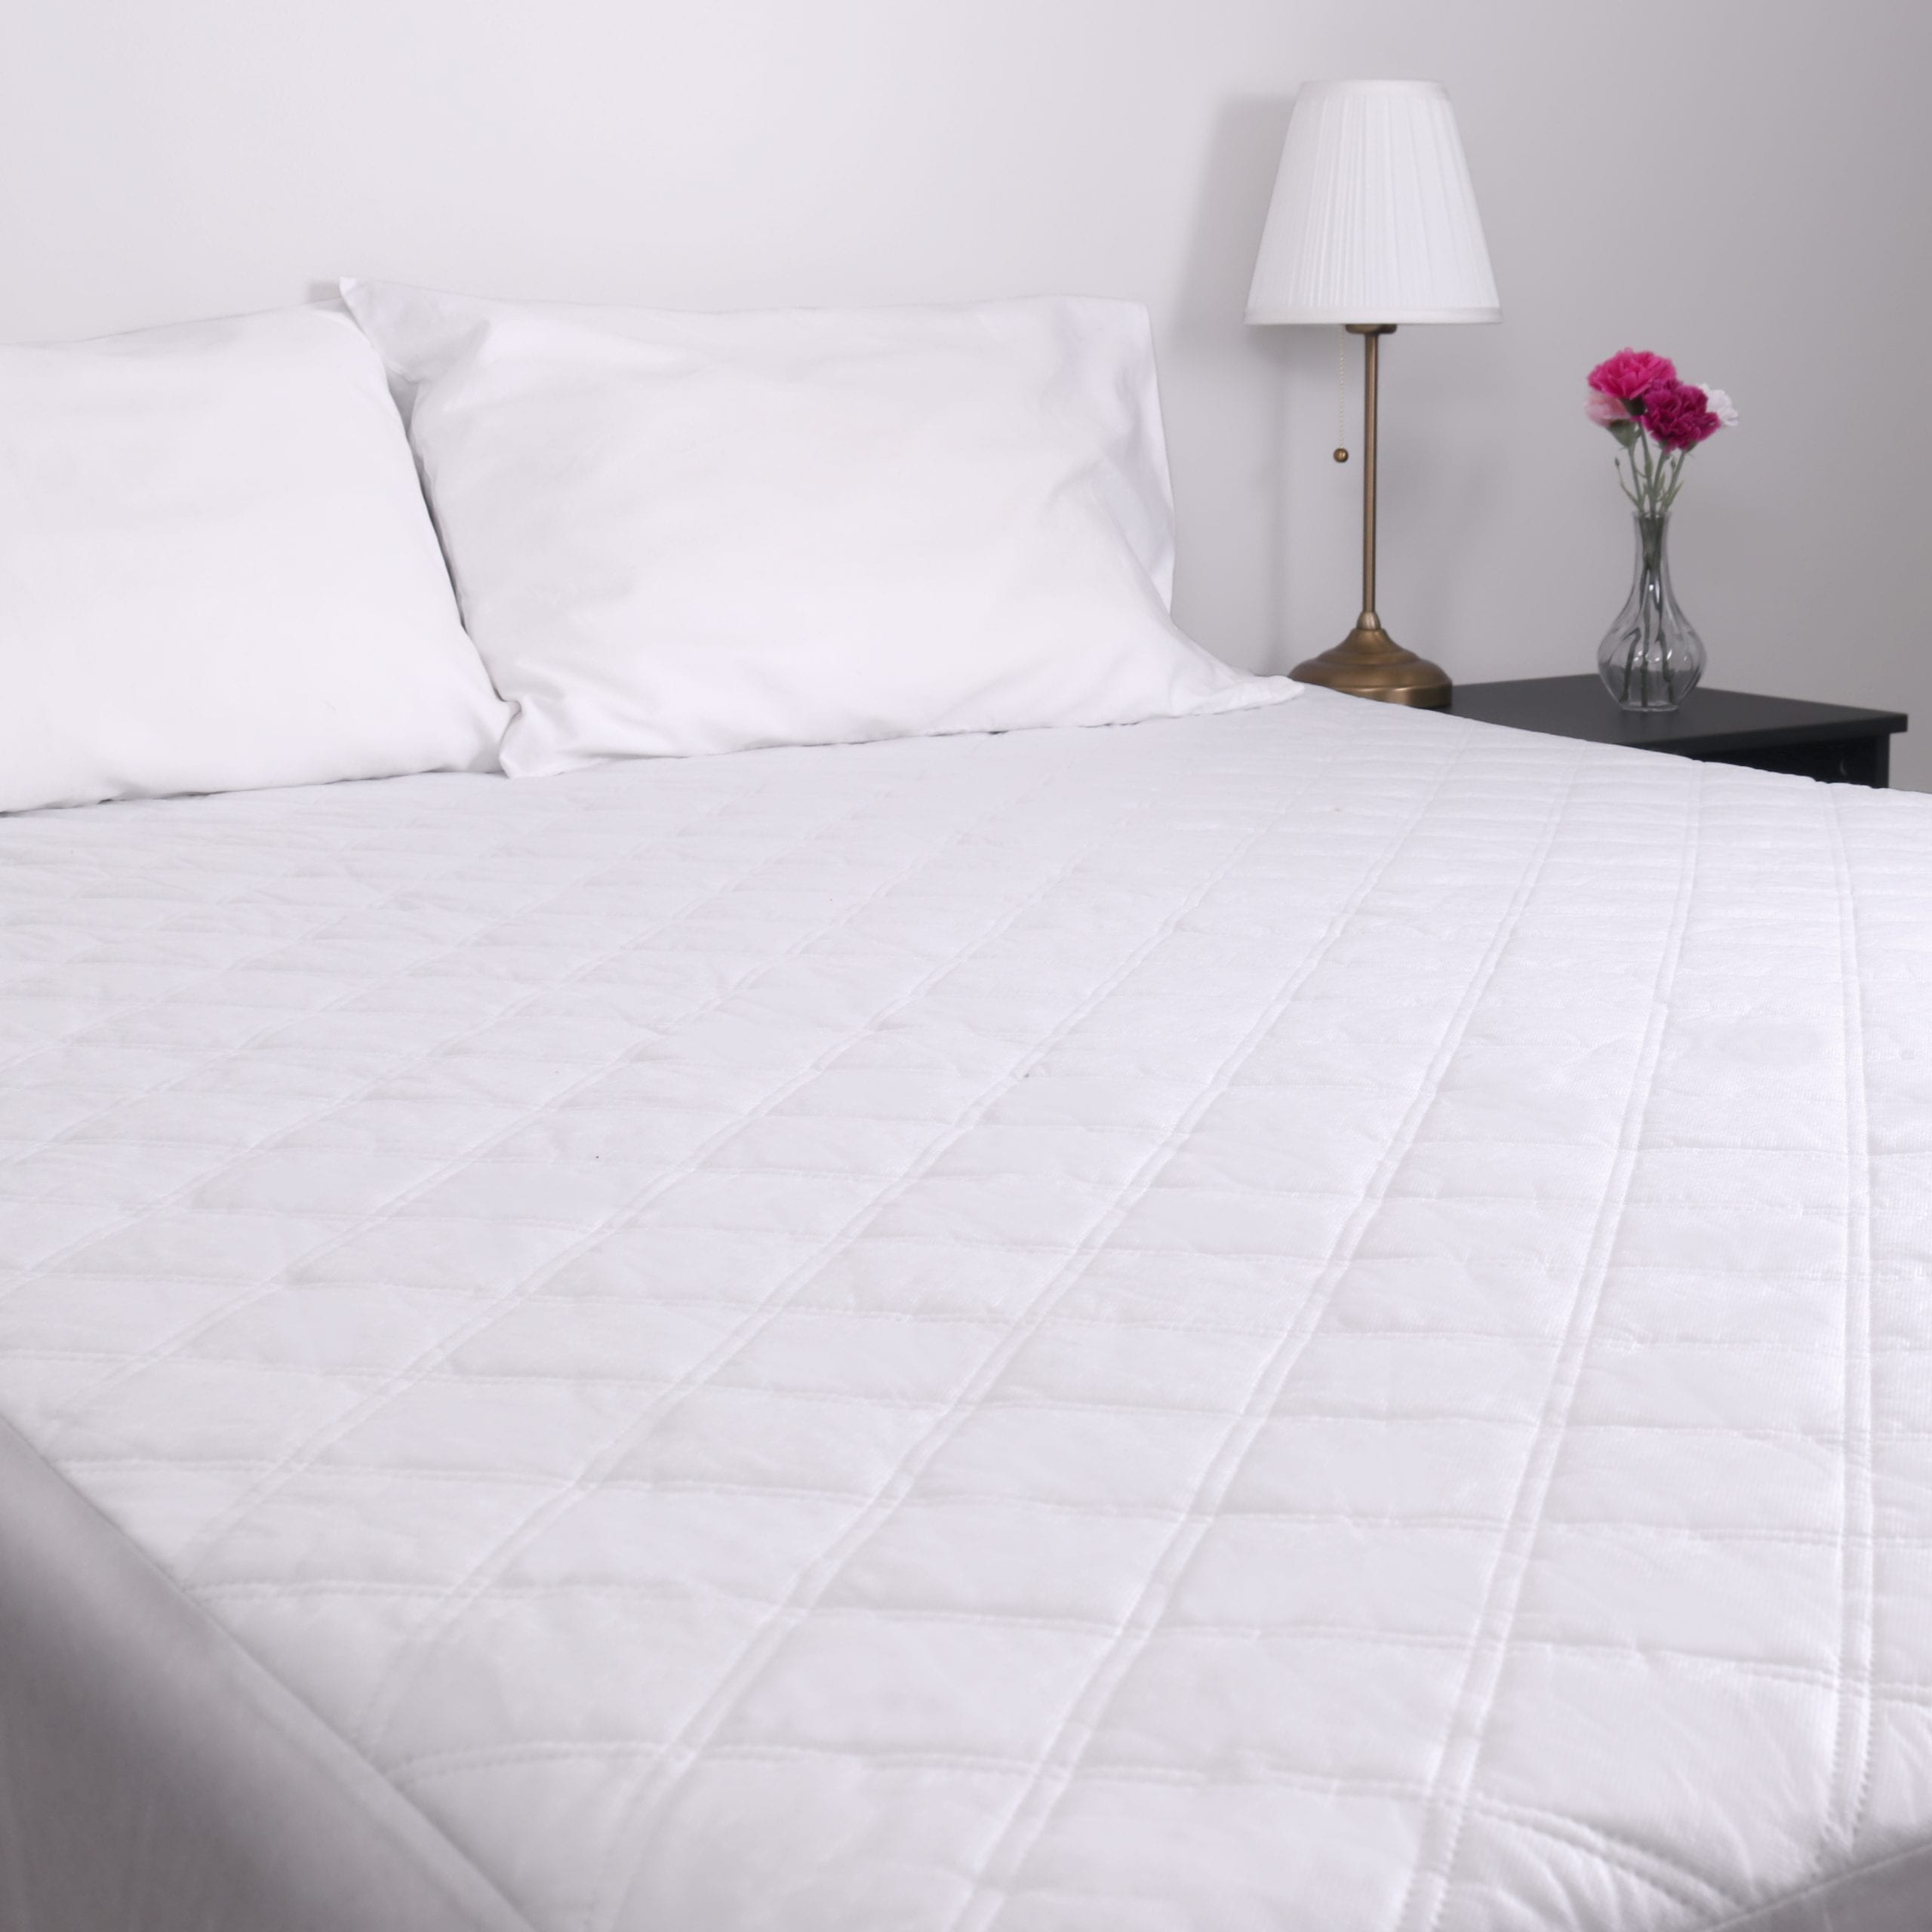 4 Ply Deluxe Quilted Waterproof Mattress Pad Hospital Twin